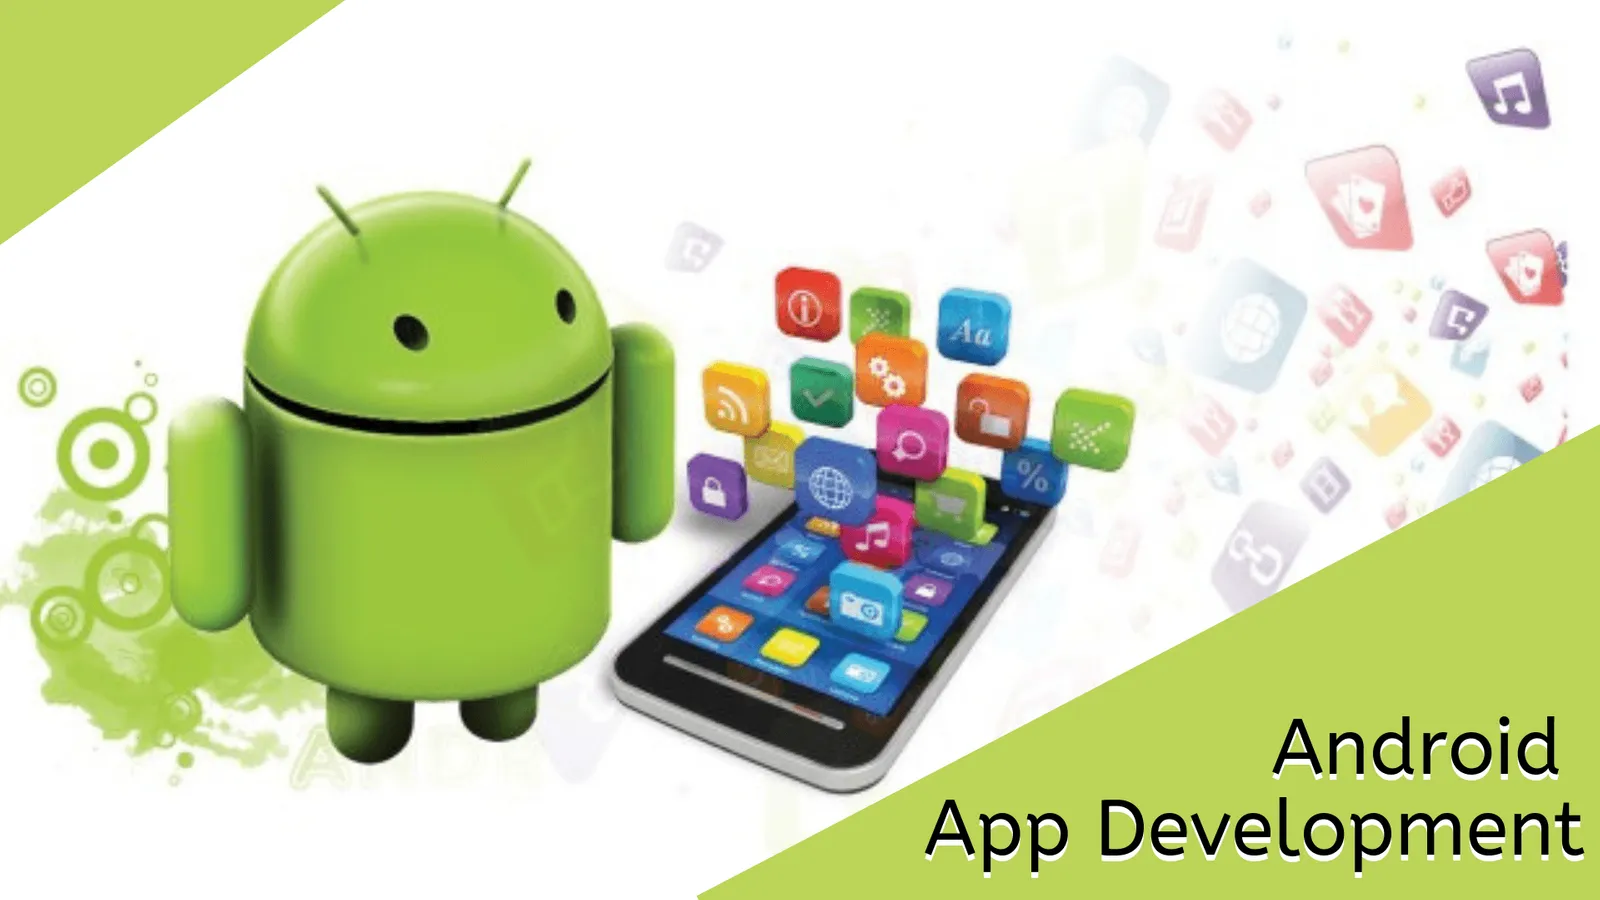 Best Android App Development Services Provider Company in USA